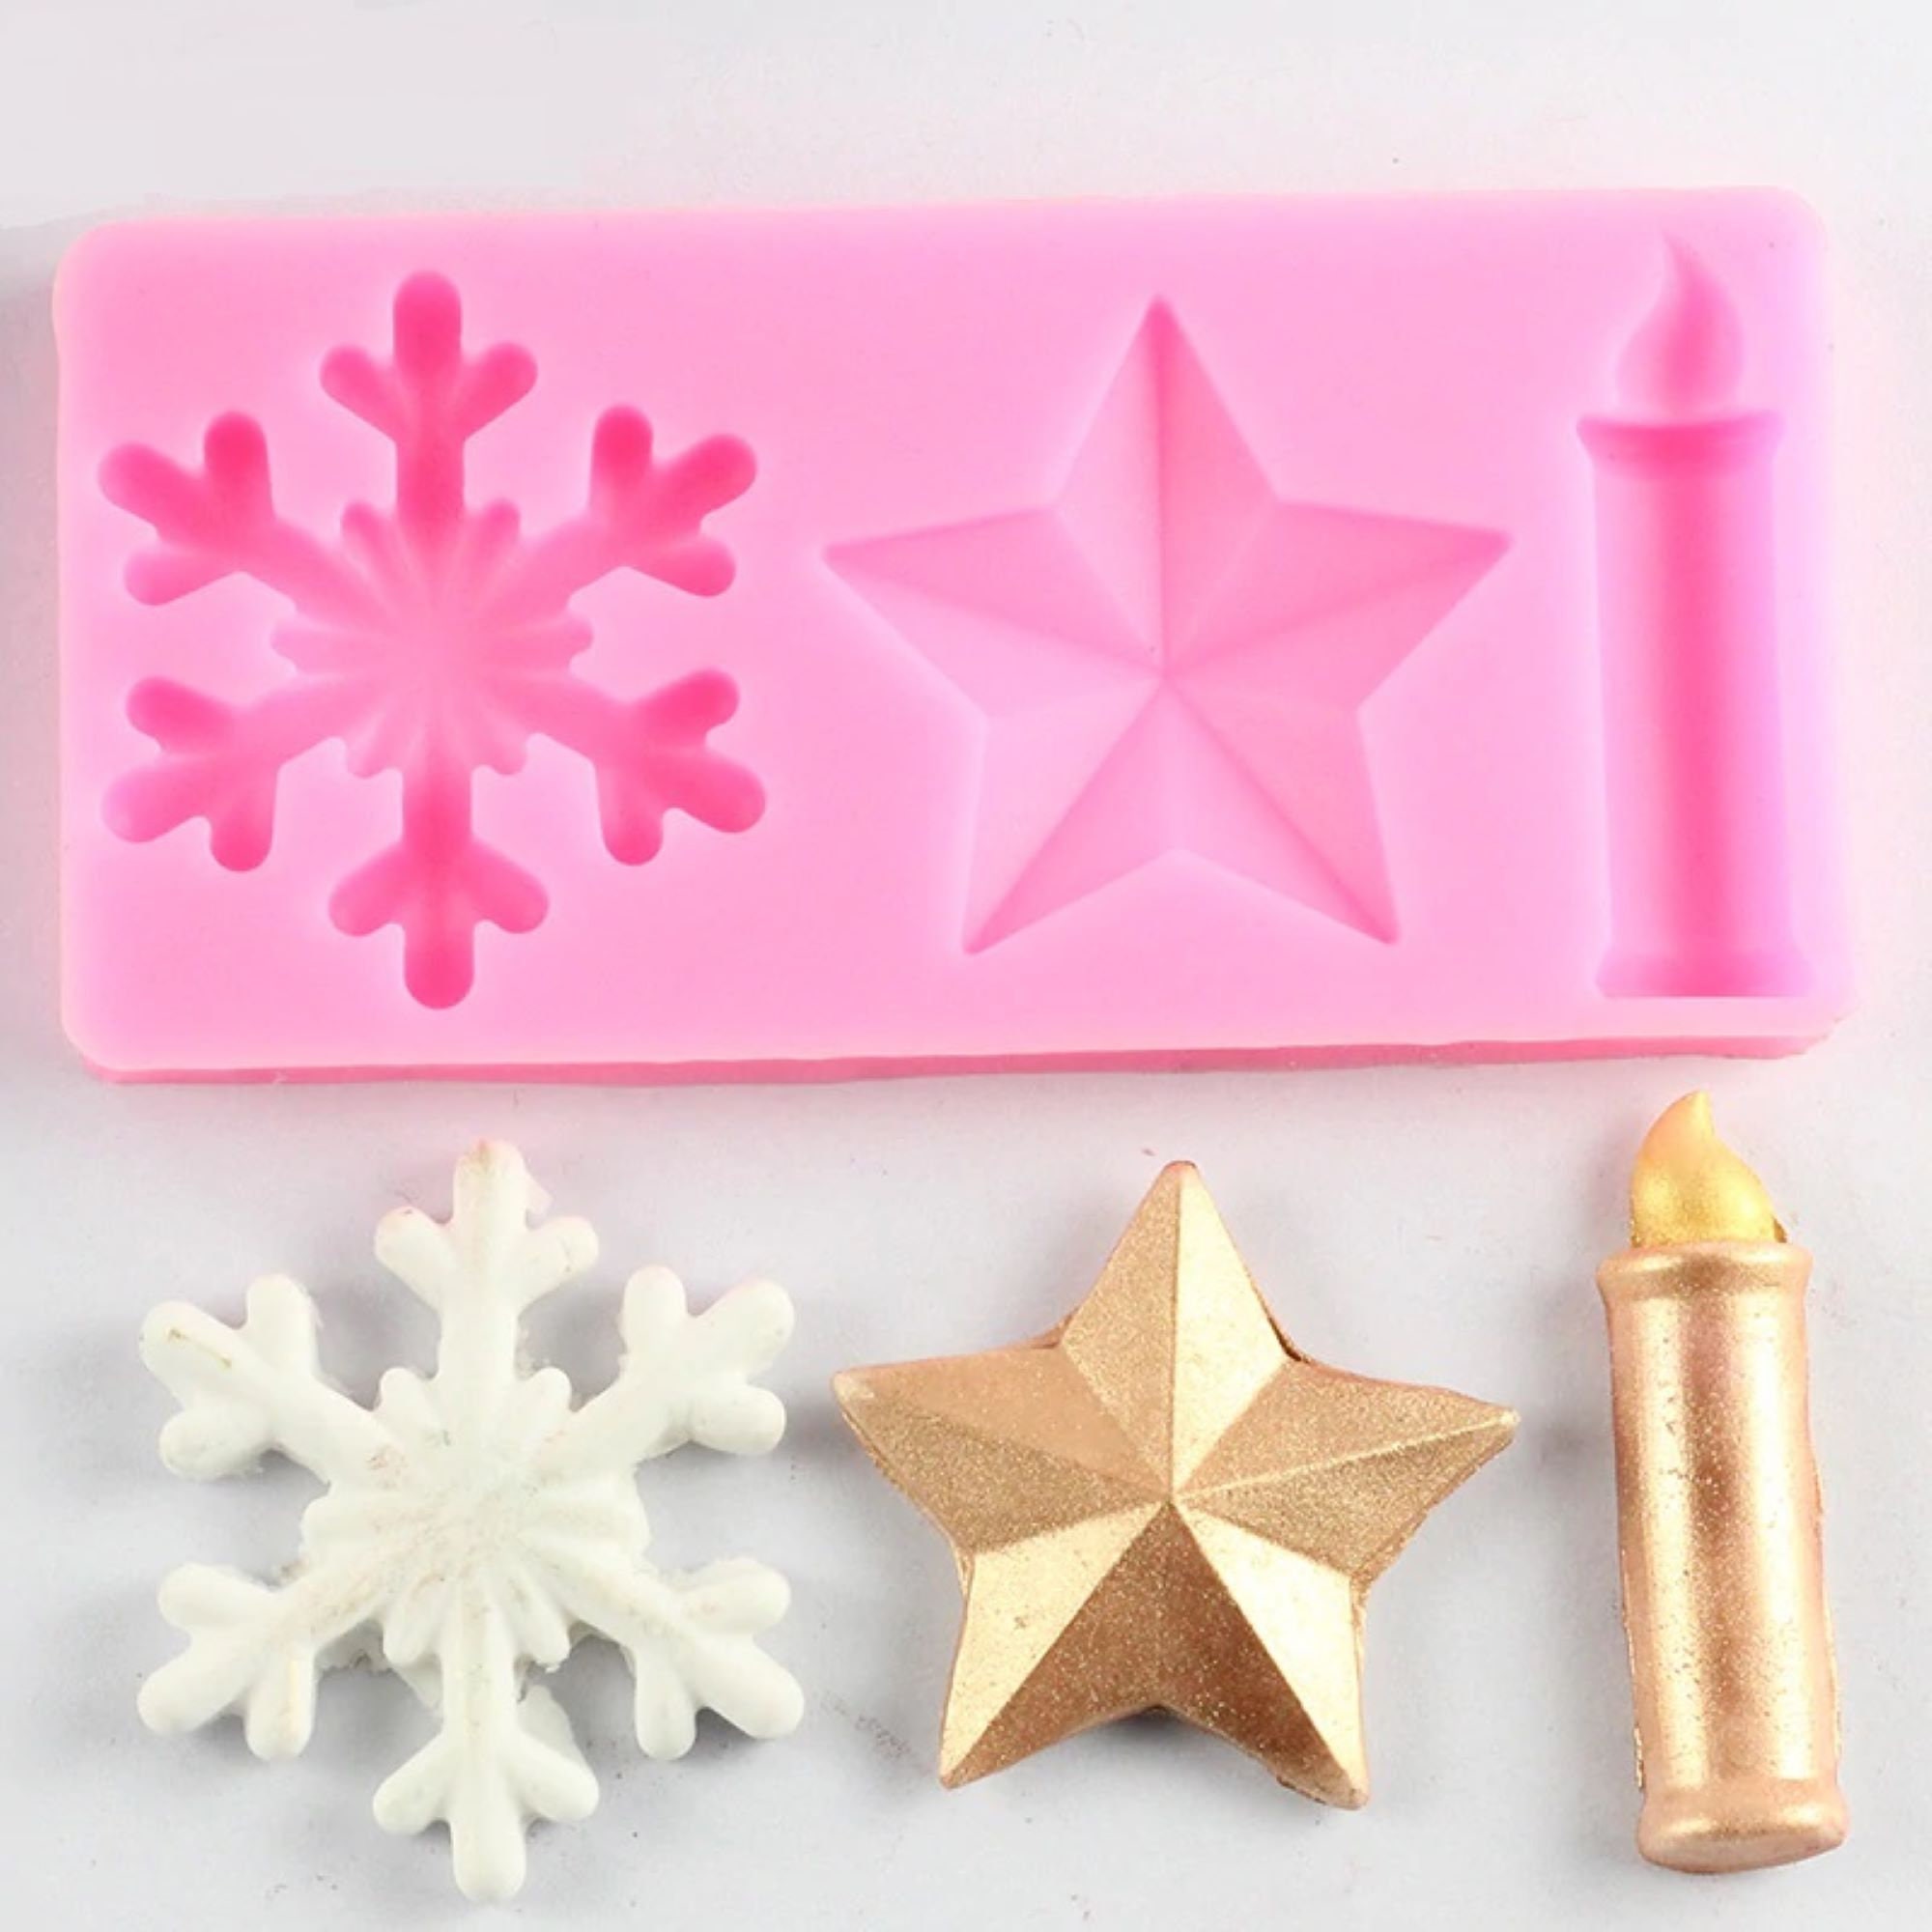 2 Pieces 3D Snowflake Silicone Mold Christmas Snowflake Fondant Silicone  Mold for Cake Cupcake Decoration Polymer Clay Crafting Projects (Pink)